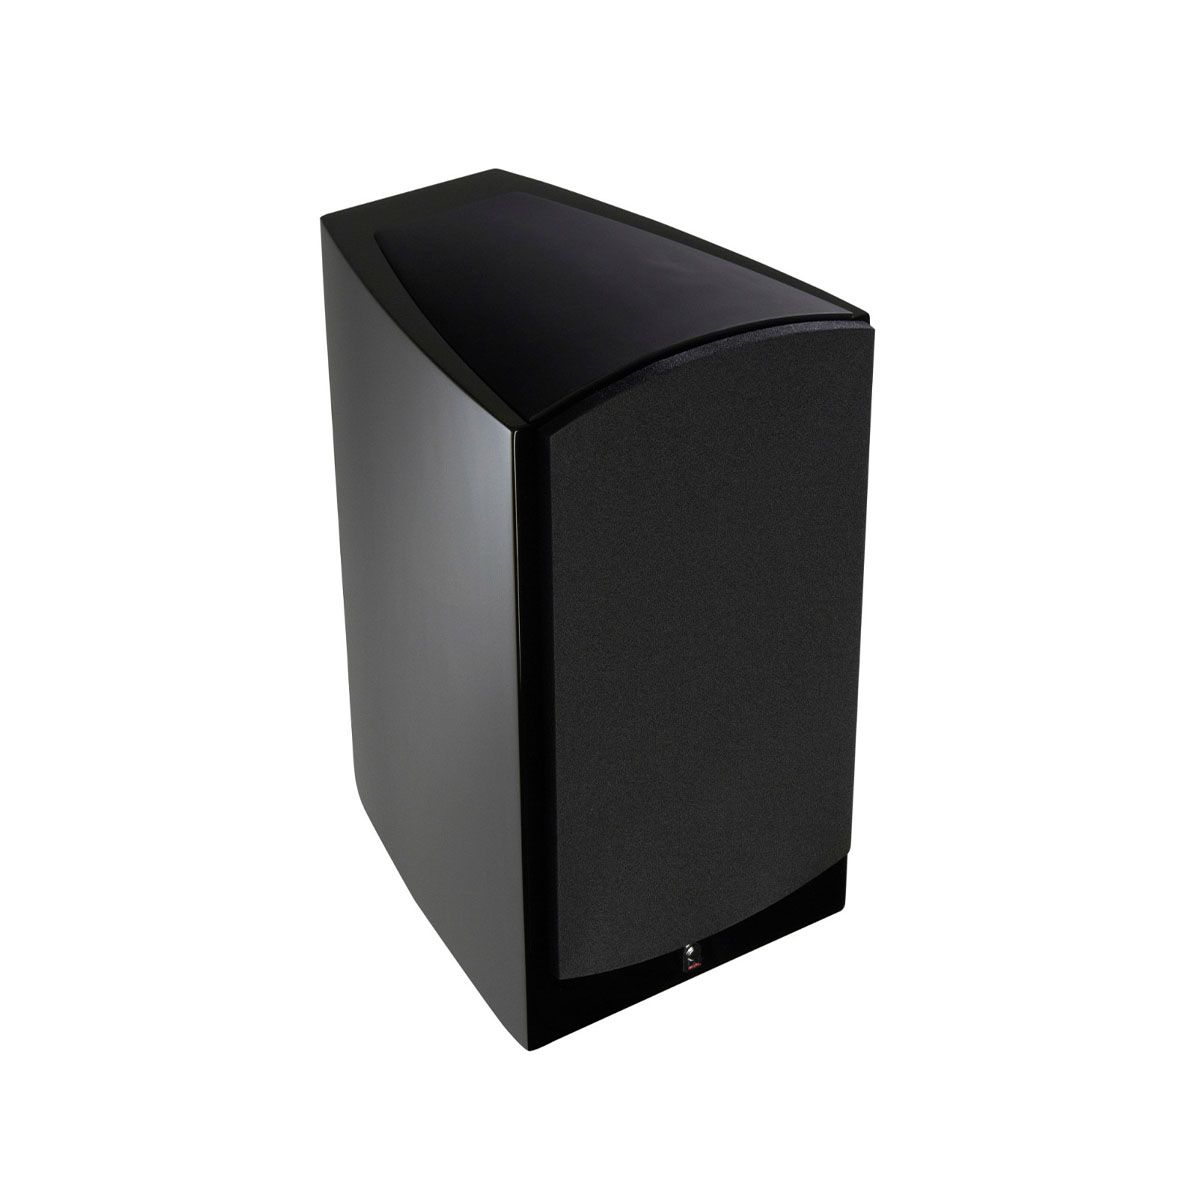 Revel M106 2-Way Bookshelf Monitor Loudspeaker - single black with grille - angled front view